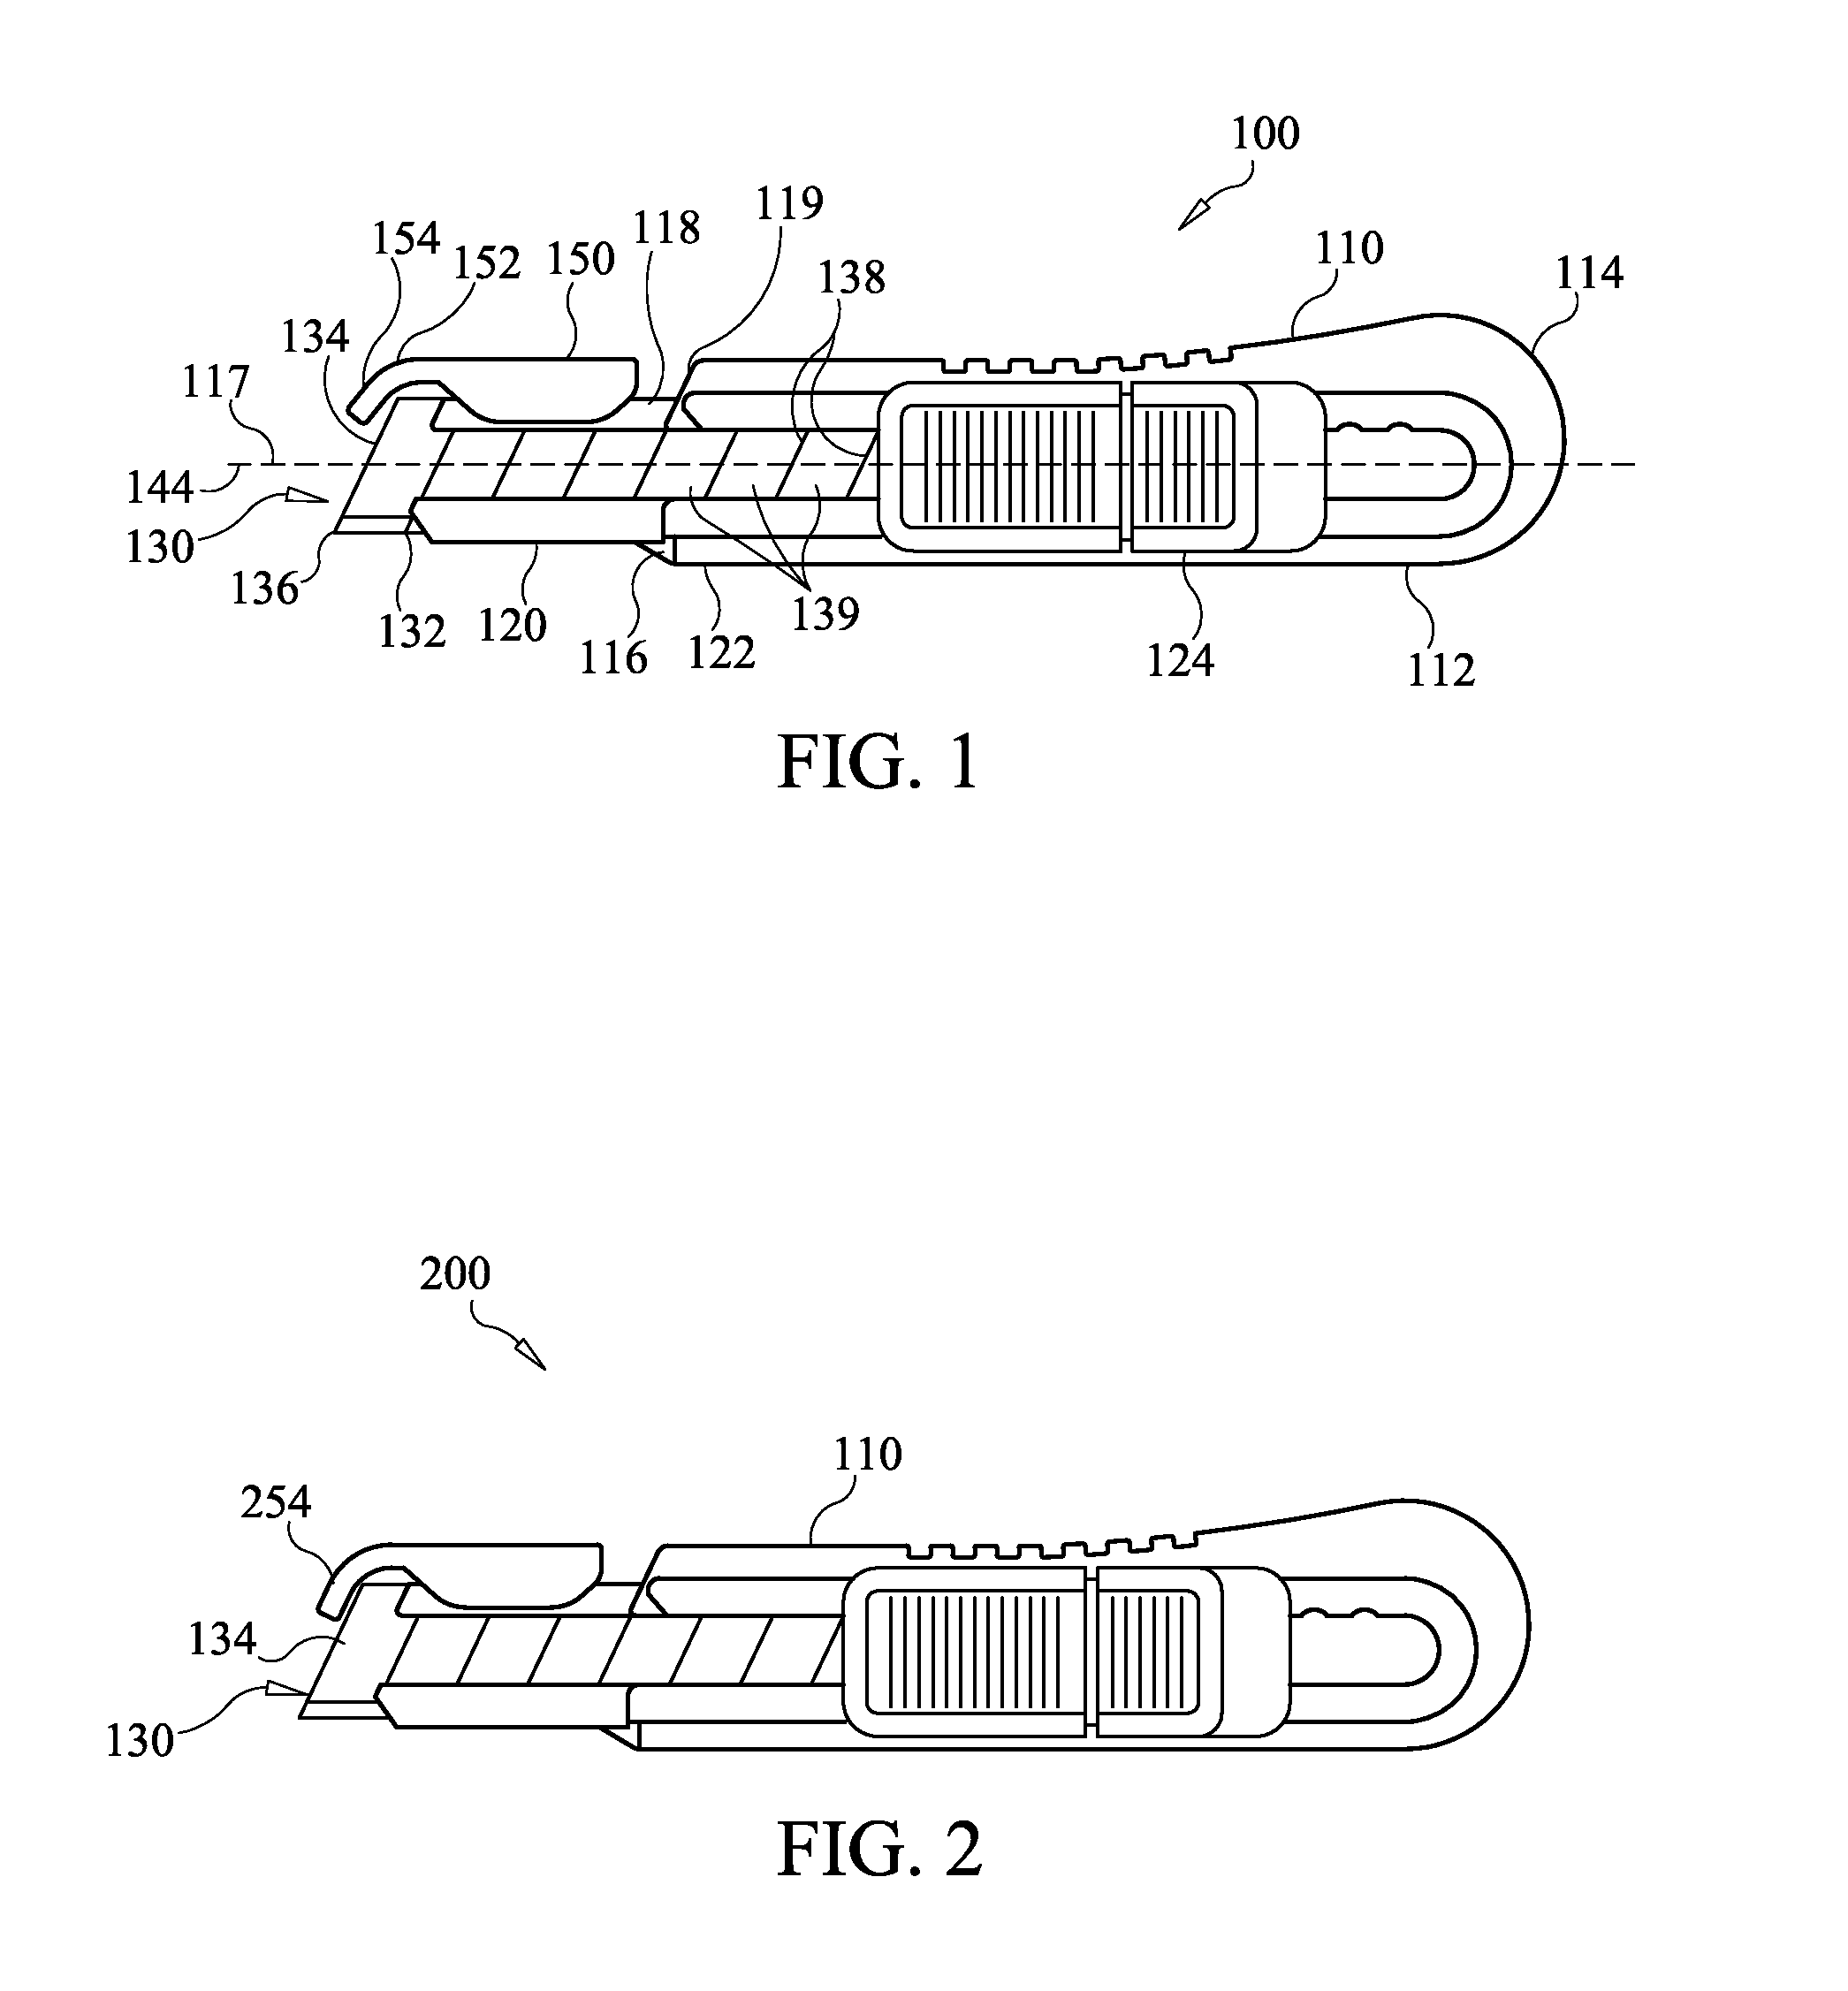 Snap-off blade knife with safety stop